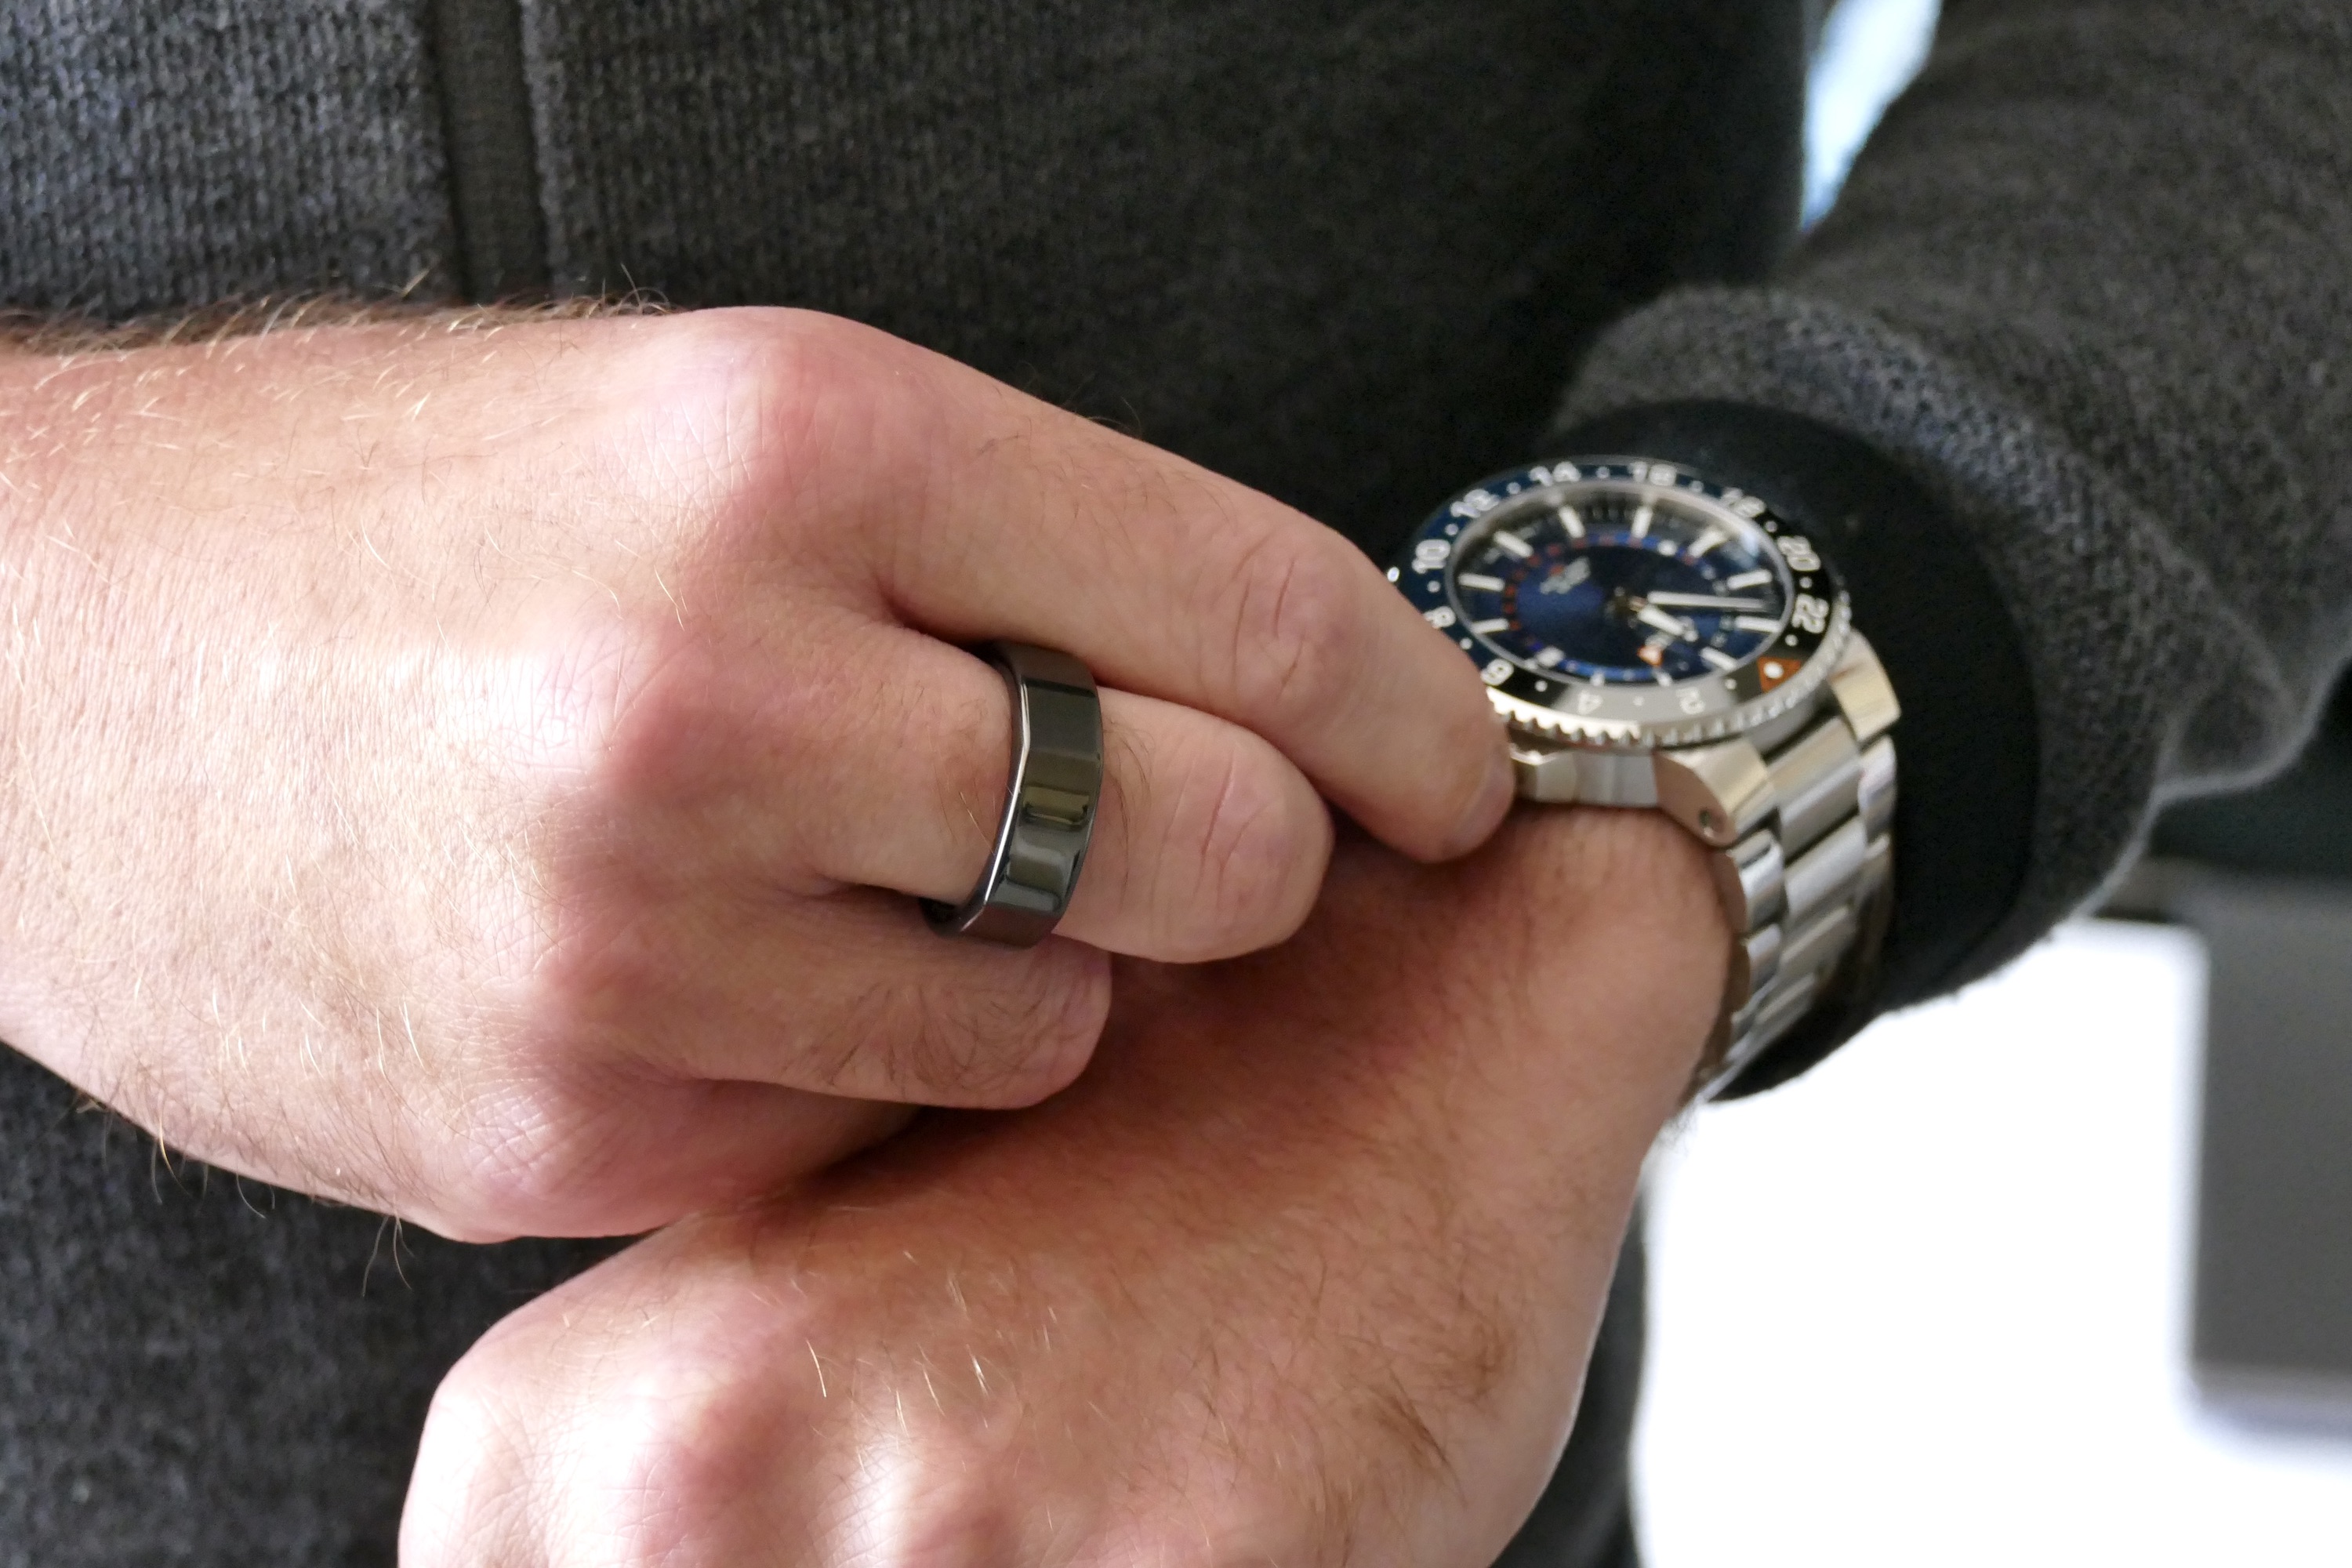 The Oura Ring worn on a man's finger, when winding a watch.